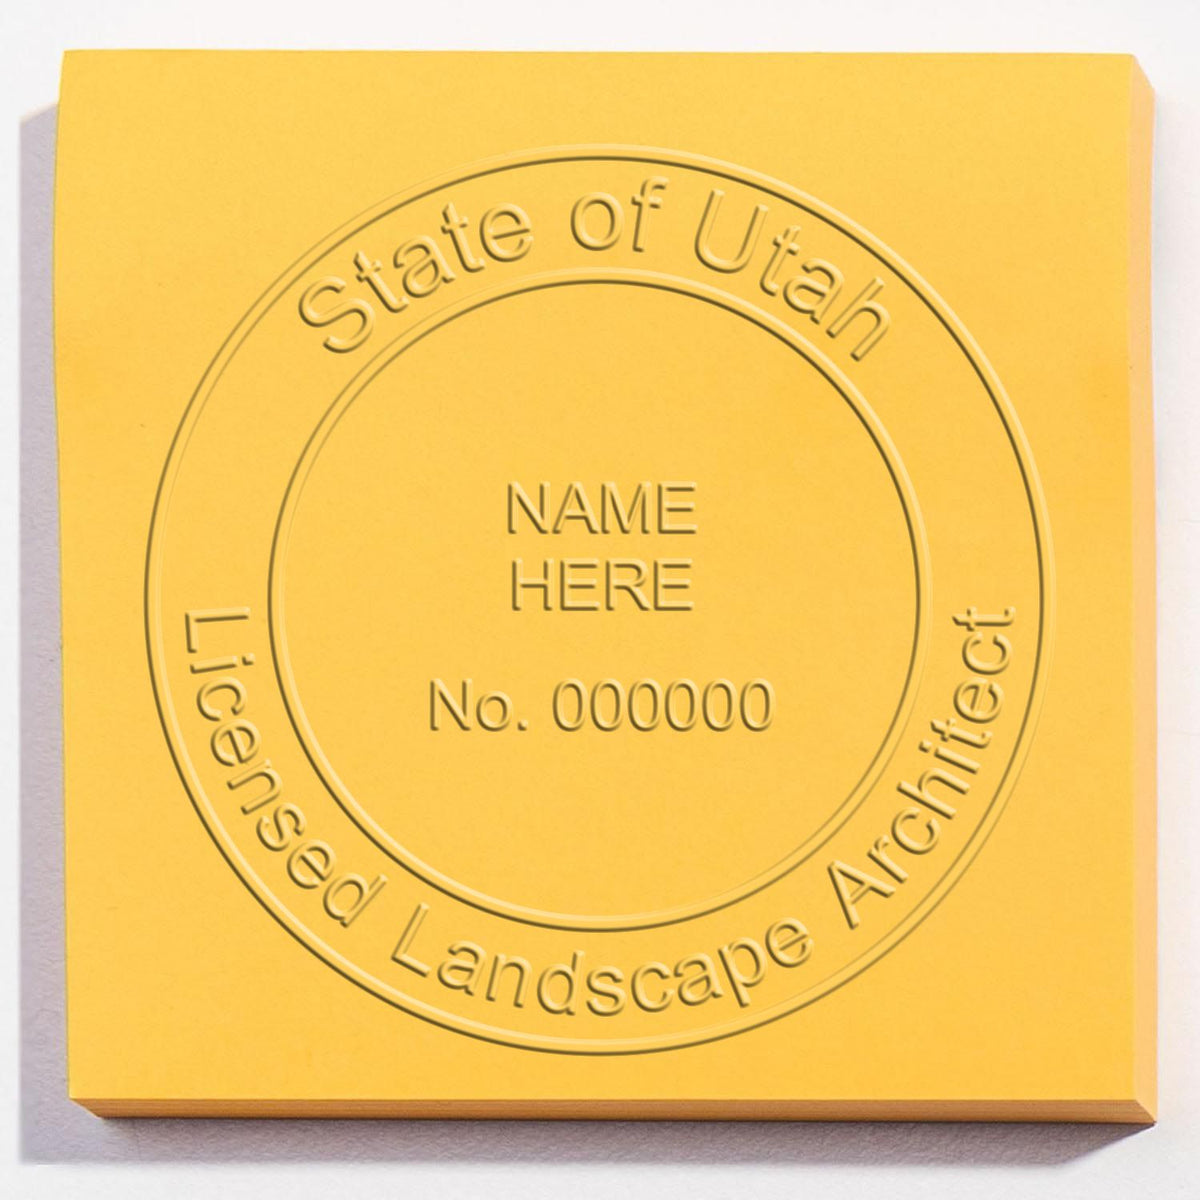 An in use photo of the Hybrid Utah Landscape Architect Seal showing a sample imprint on a cardstock